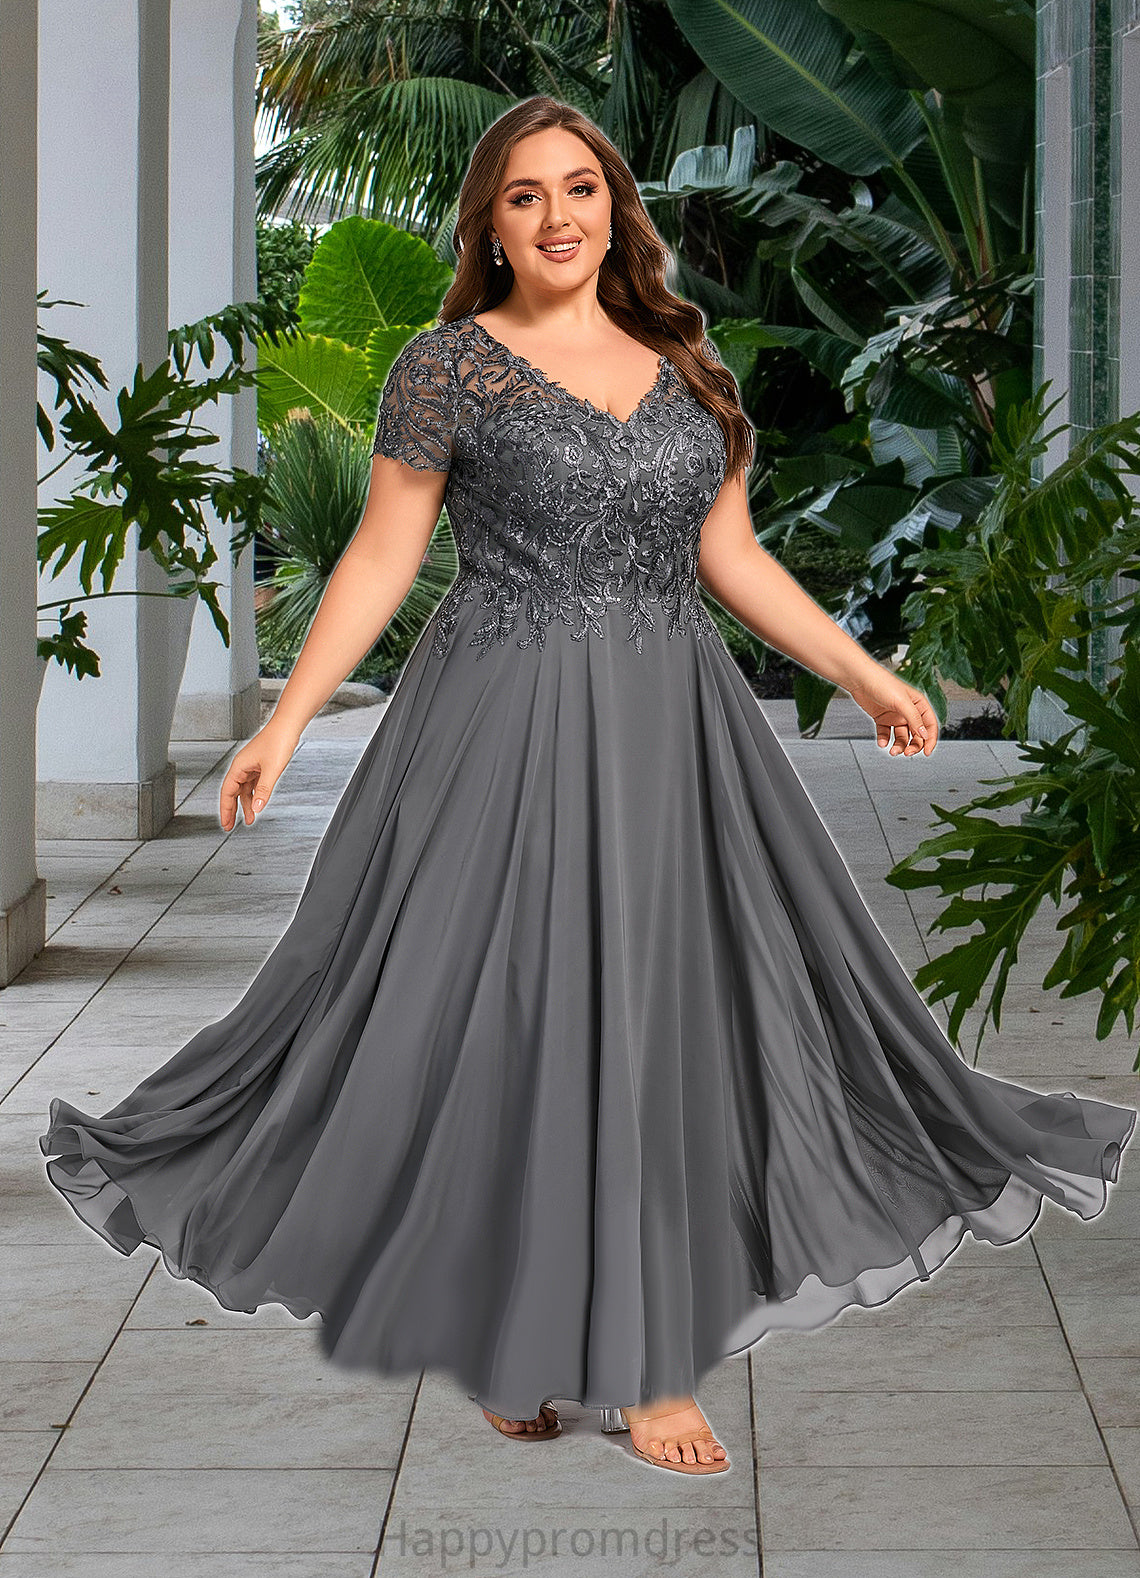 Aspen A-line V-Neck Illusion Ankle-Length Chiffon Lace Mother of the Bride Dress With Sequins XXSP0021830